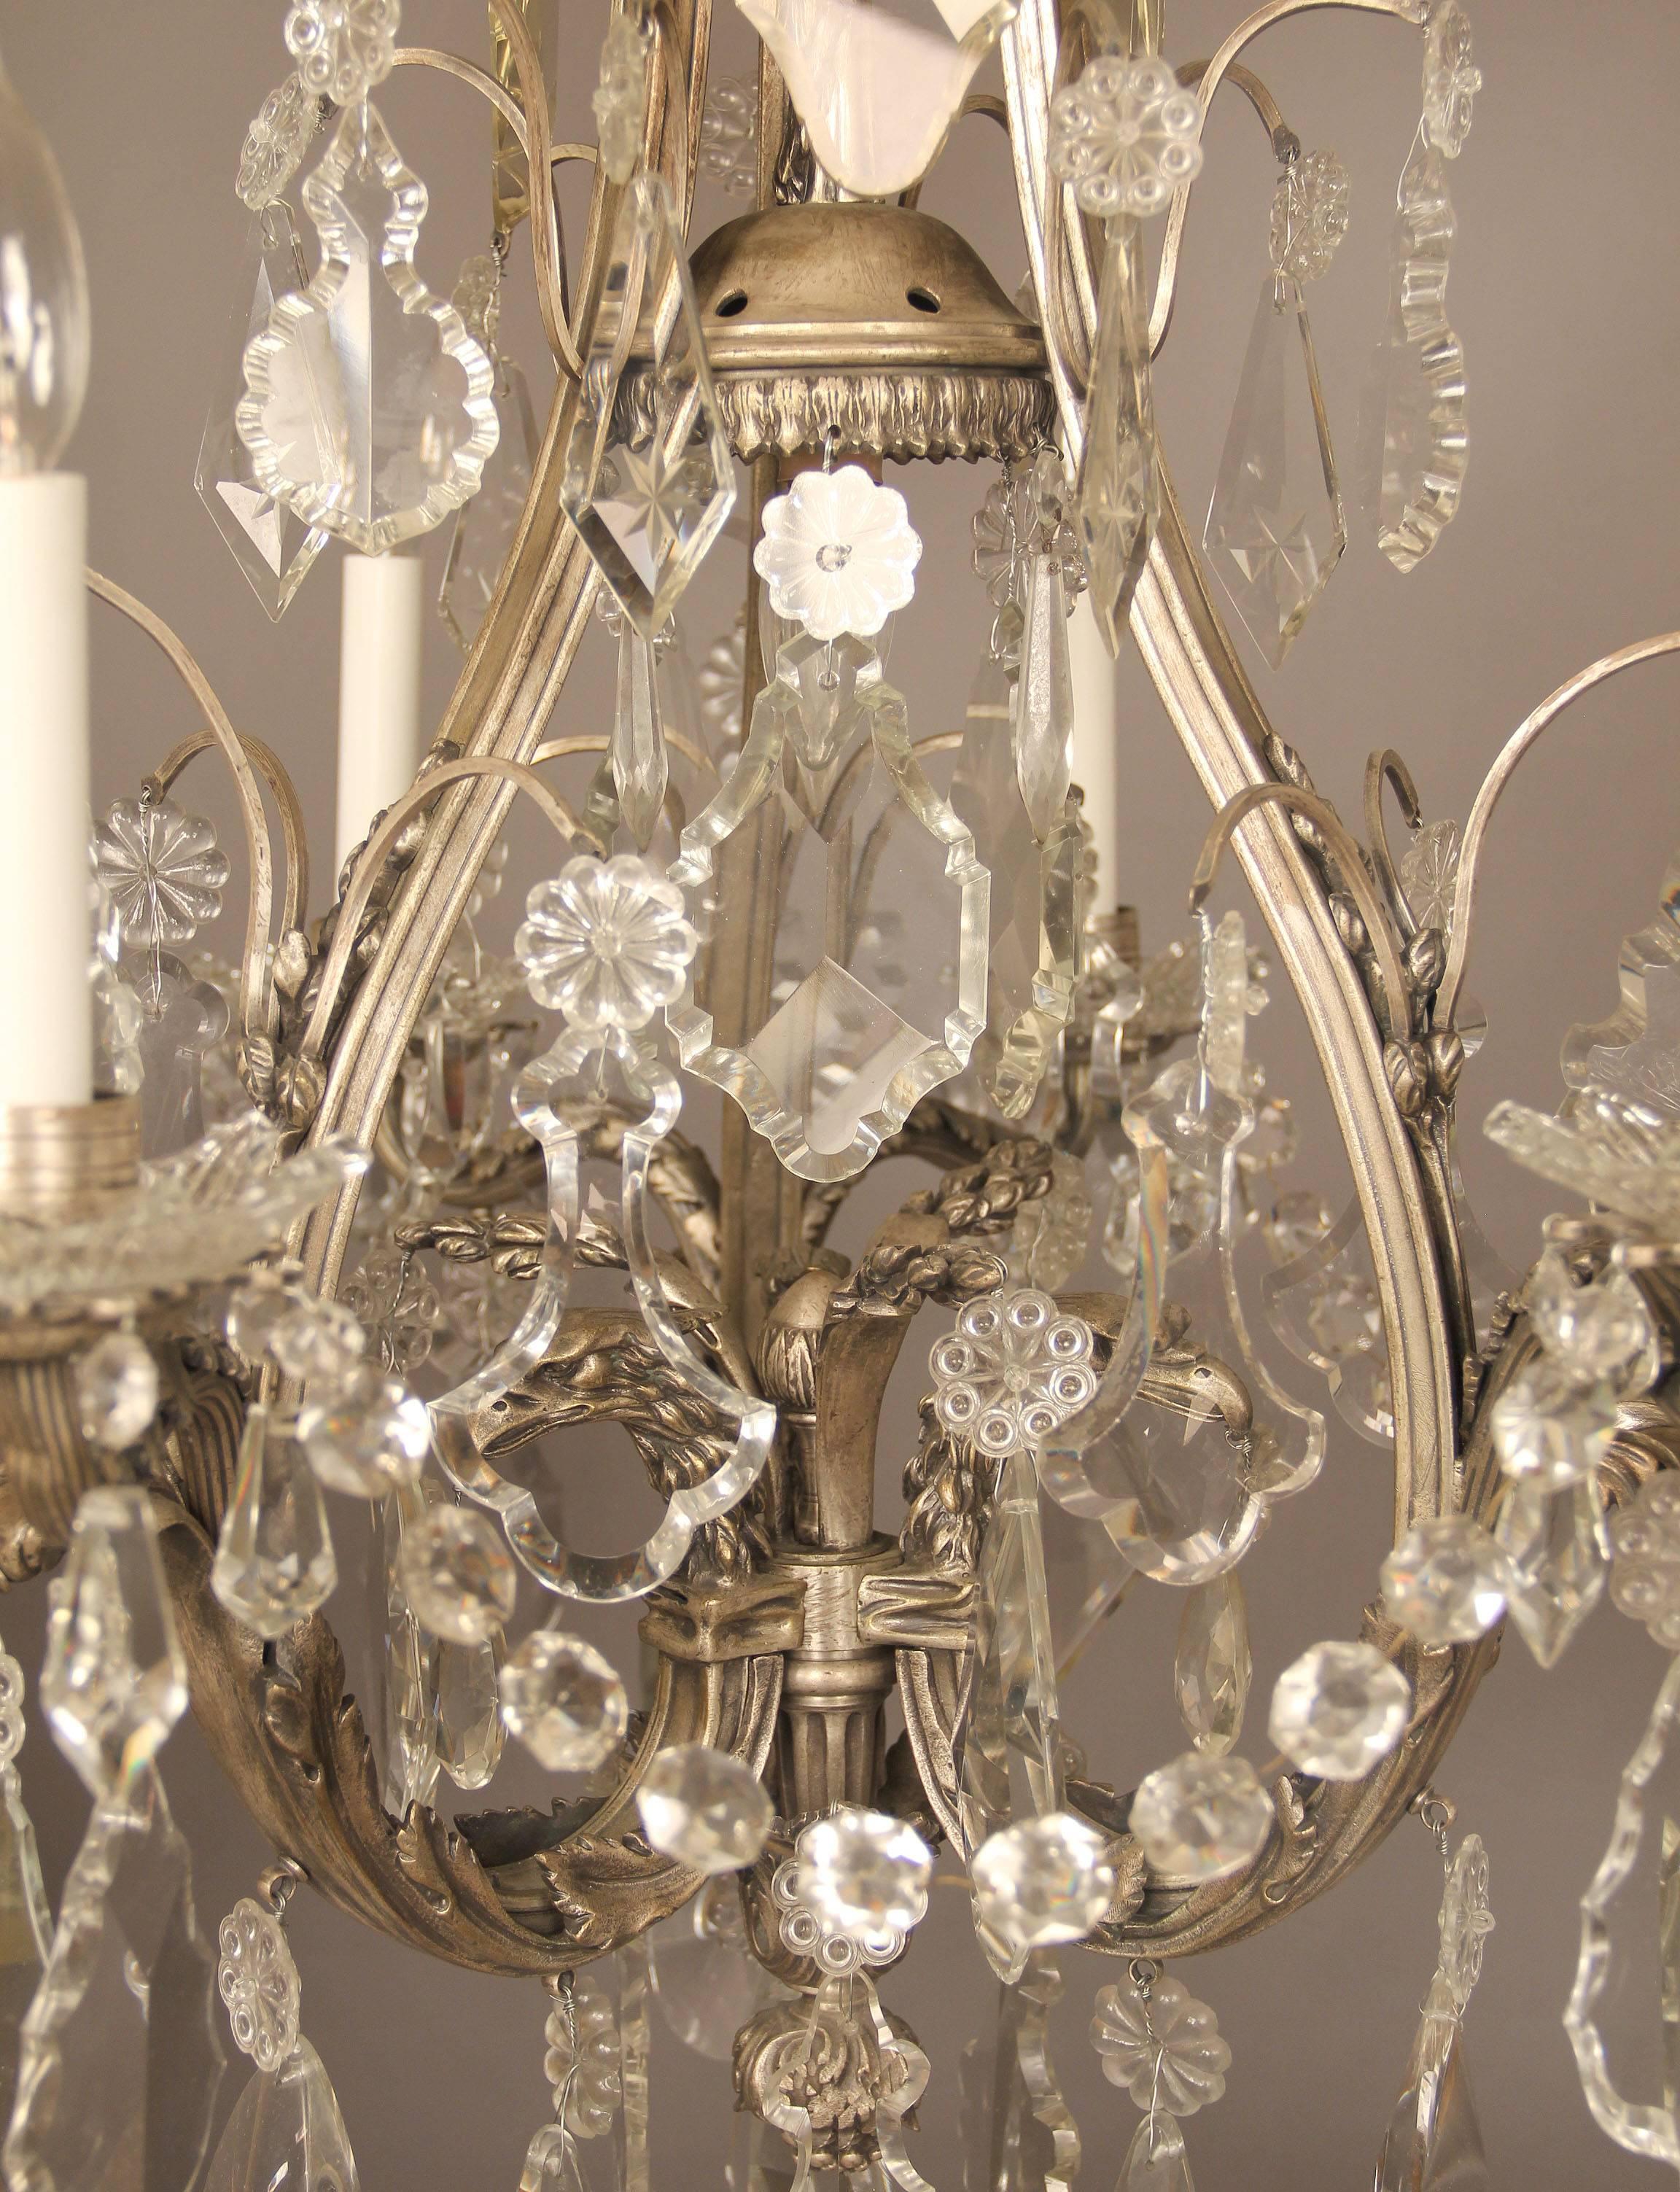 An exceptional late 19th century silvered bronze and crystal six light chandeliers.

Multifaceted and shaped crystal, central column with three eagle heads, top dome with floral and curtain designs, six perimeter lights with bobeche